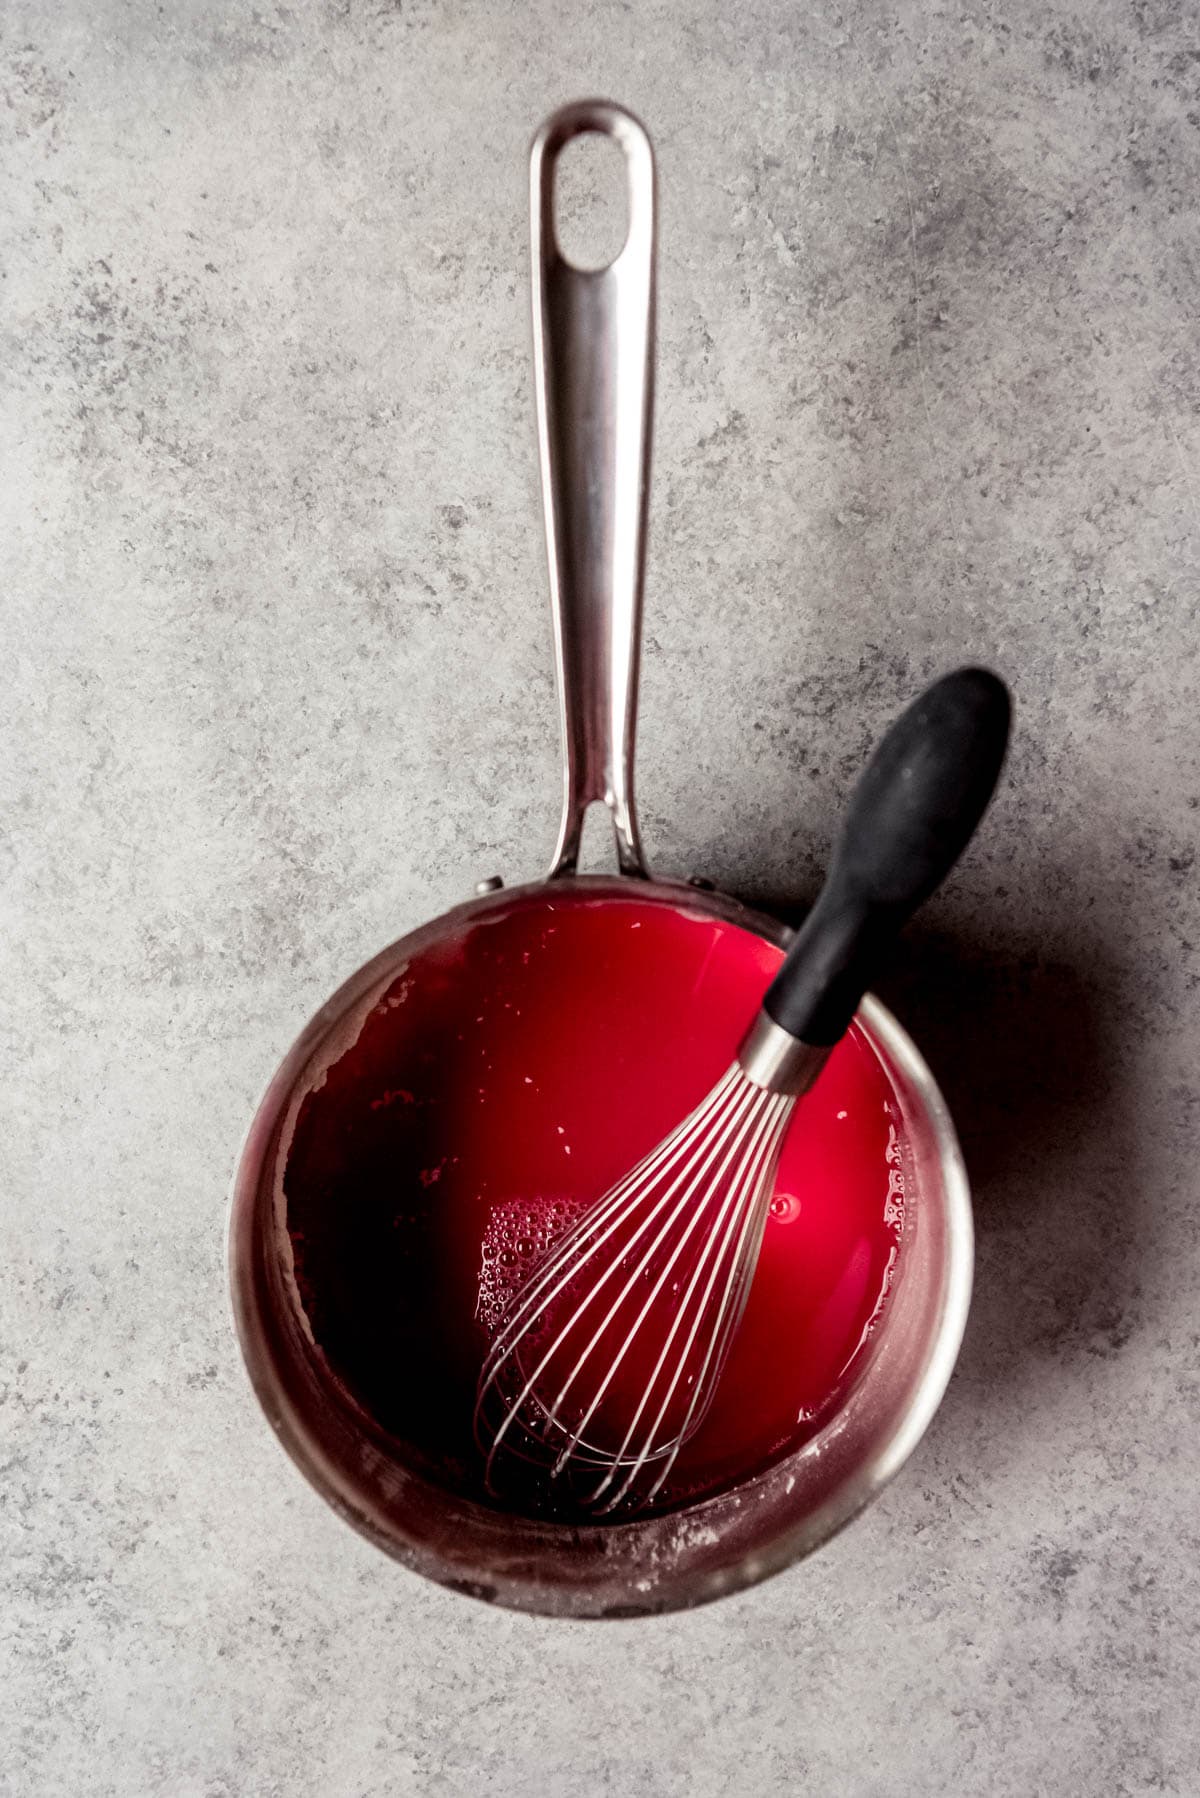 A whisk in a saucepan with sugar, cornstarch, and cherry juice.